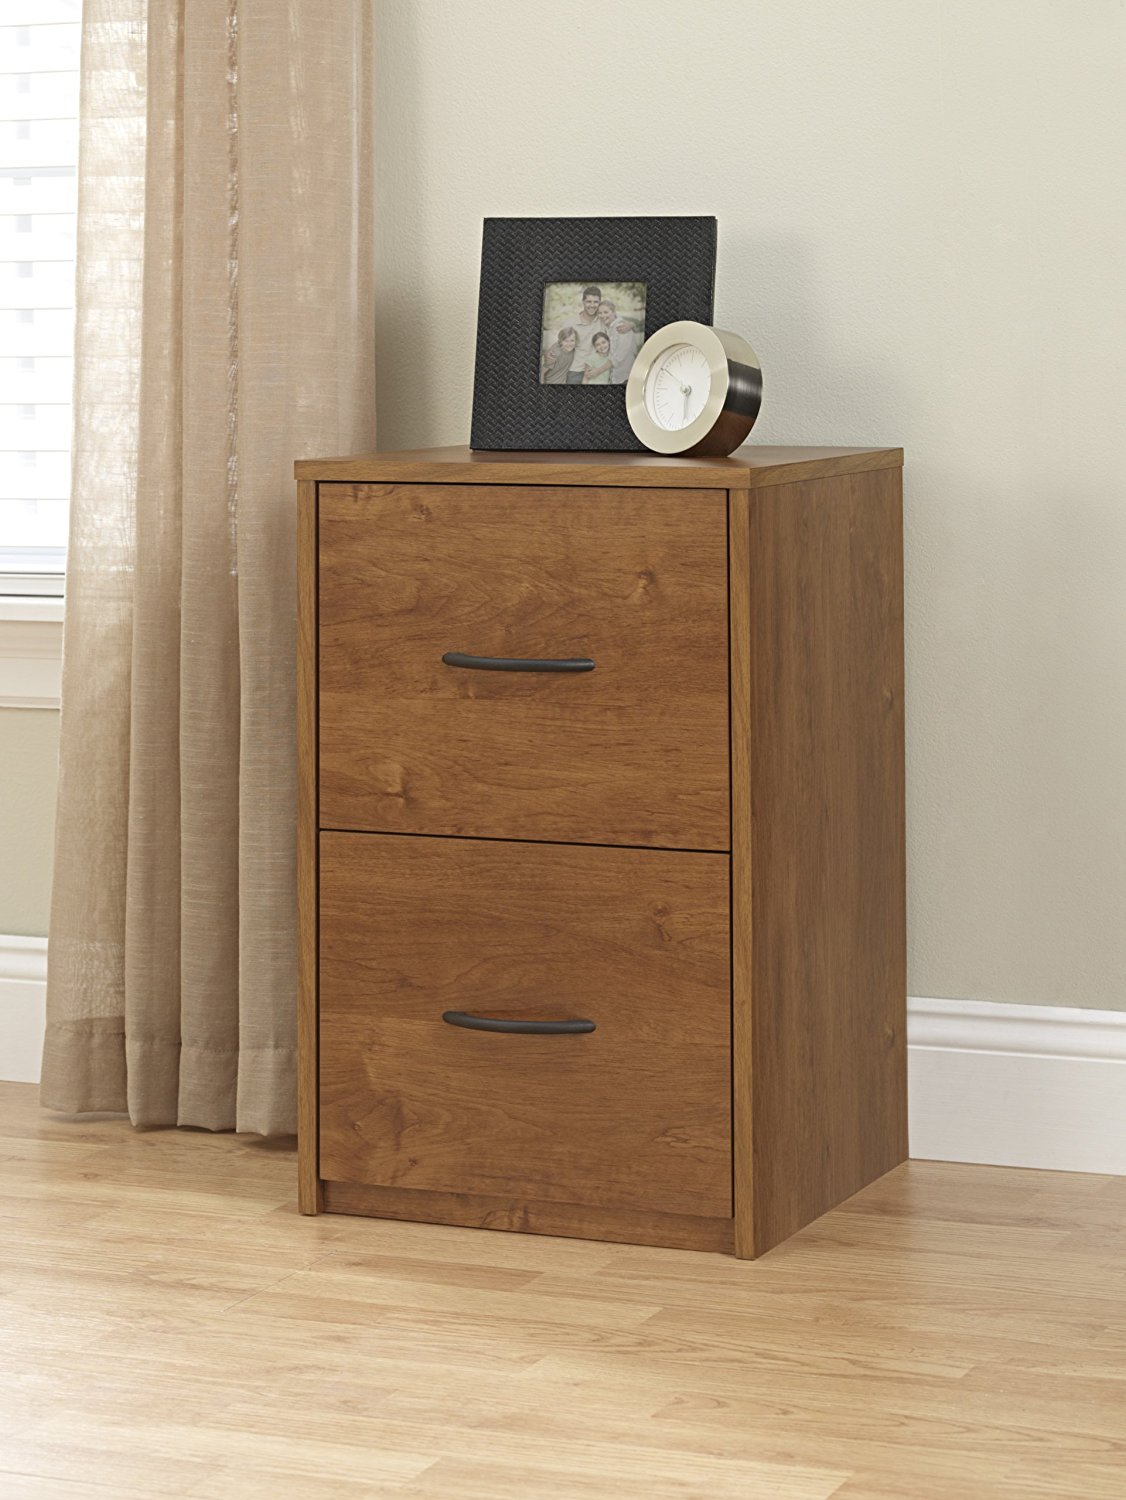 Top 20 Wooden File Cabinets With Drawers intended for dimensions 1126 X 1500